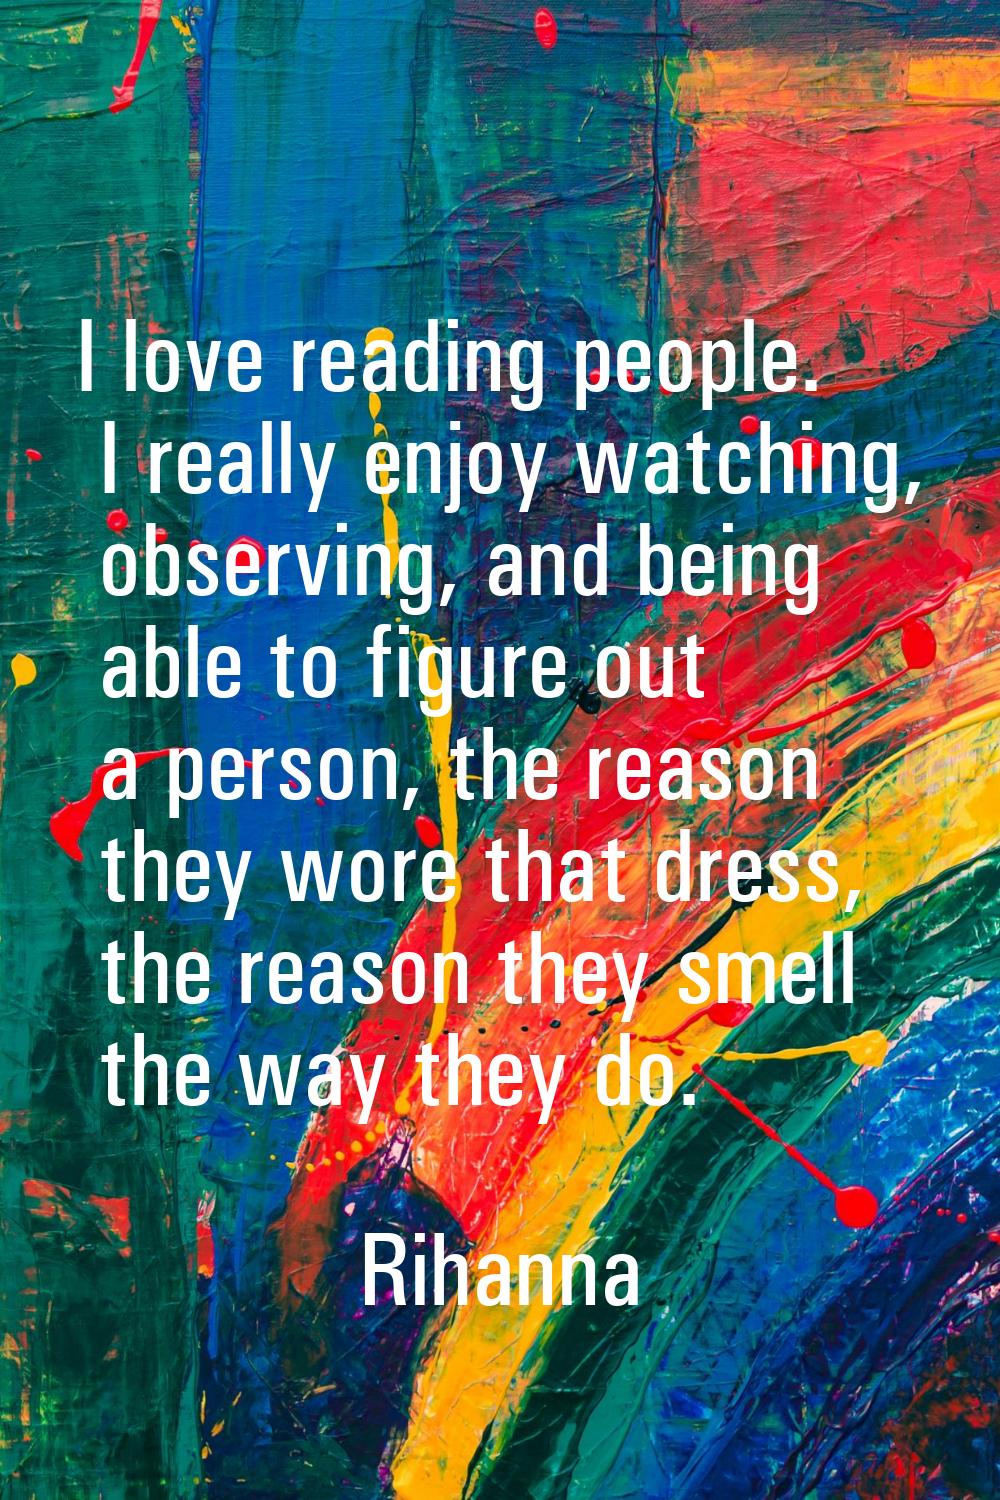 I love reading people. I really enjoy watching, observing, and being able to figure out a person, t